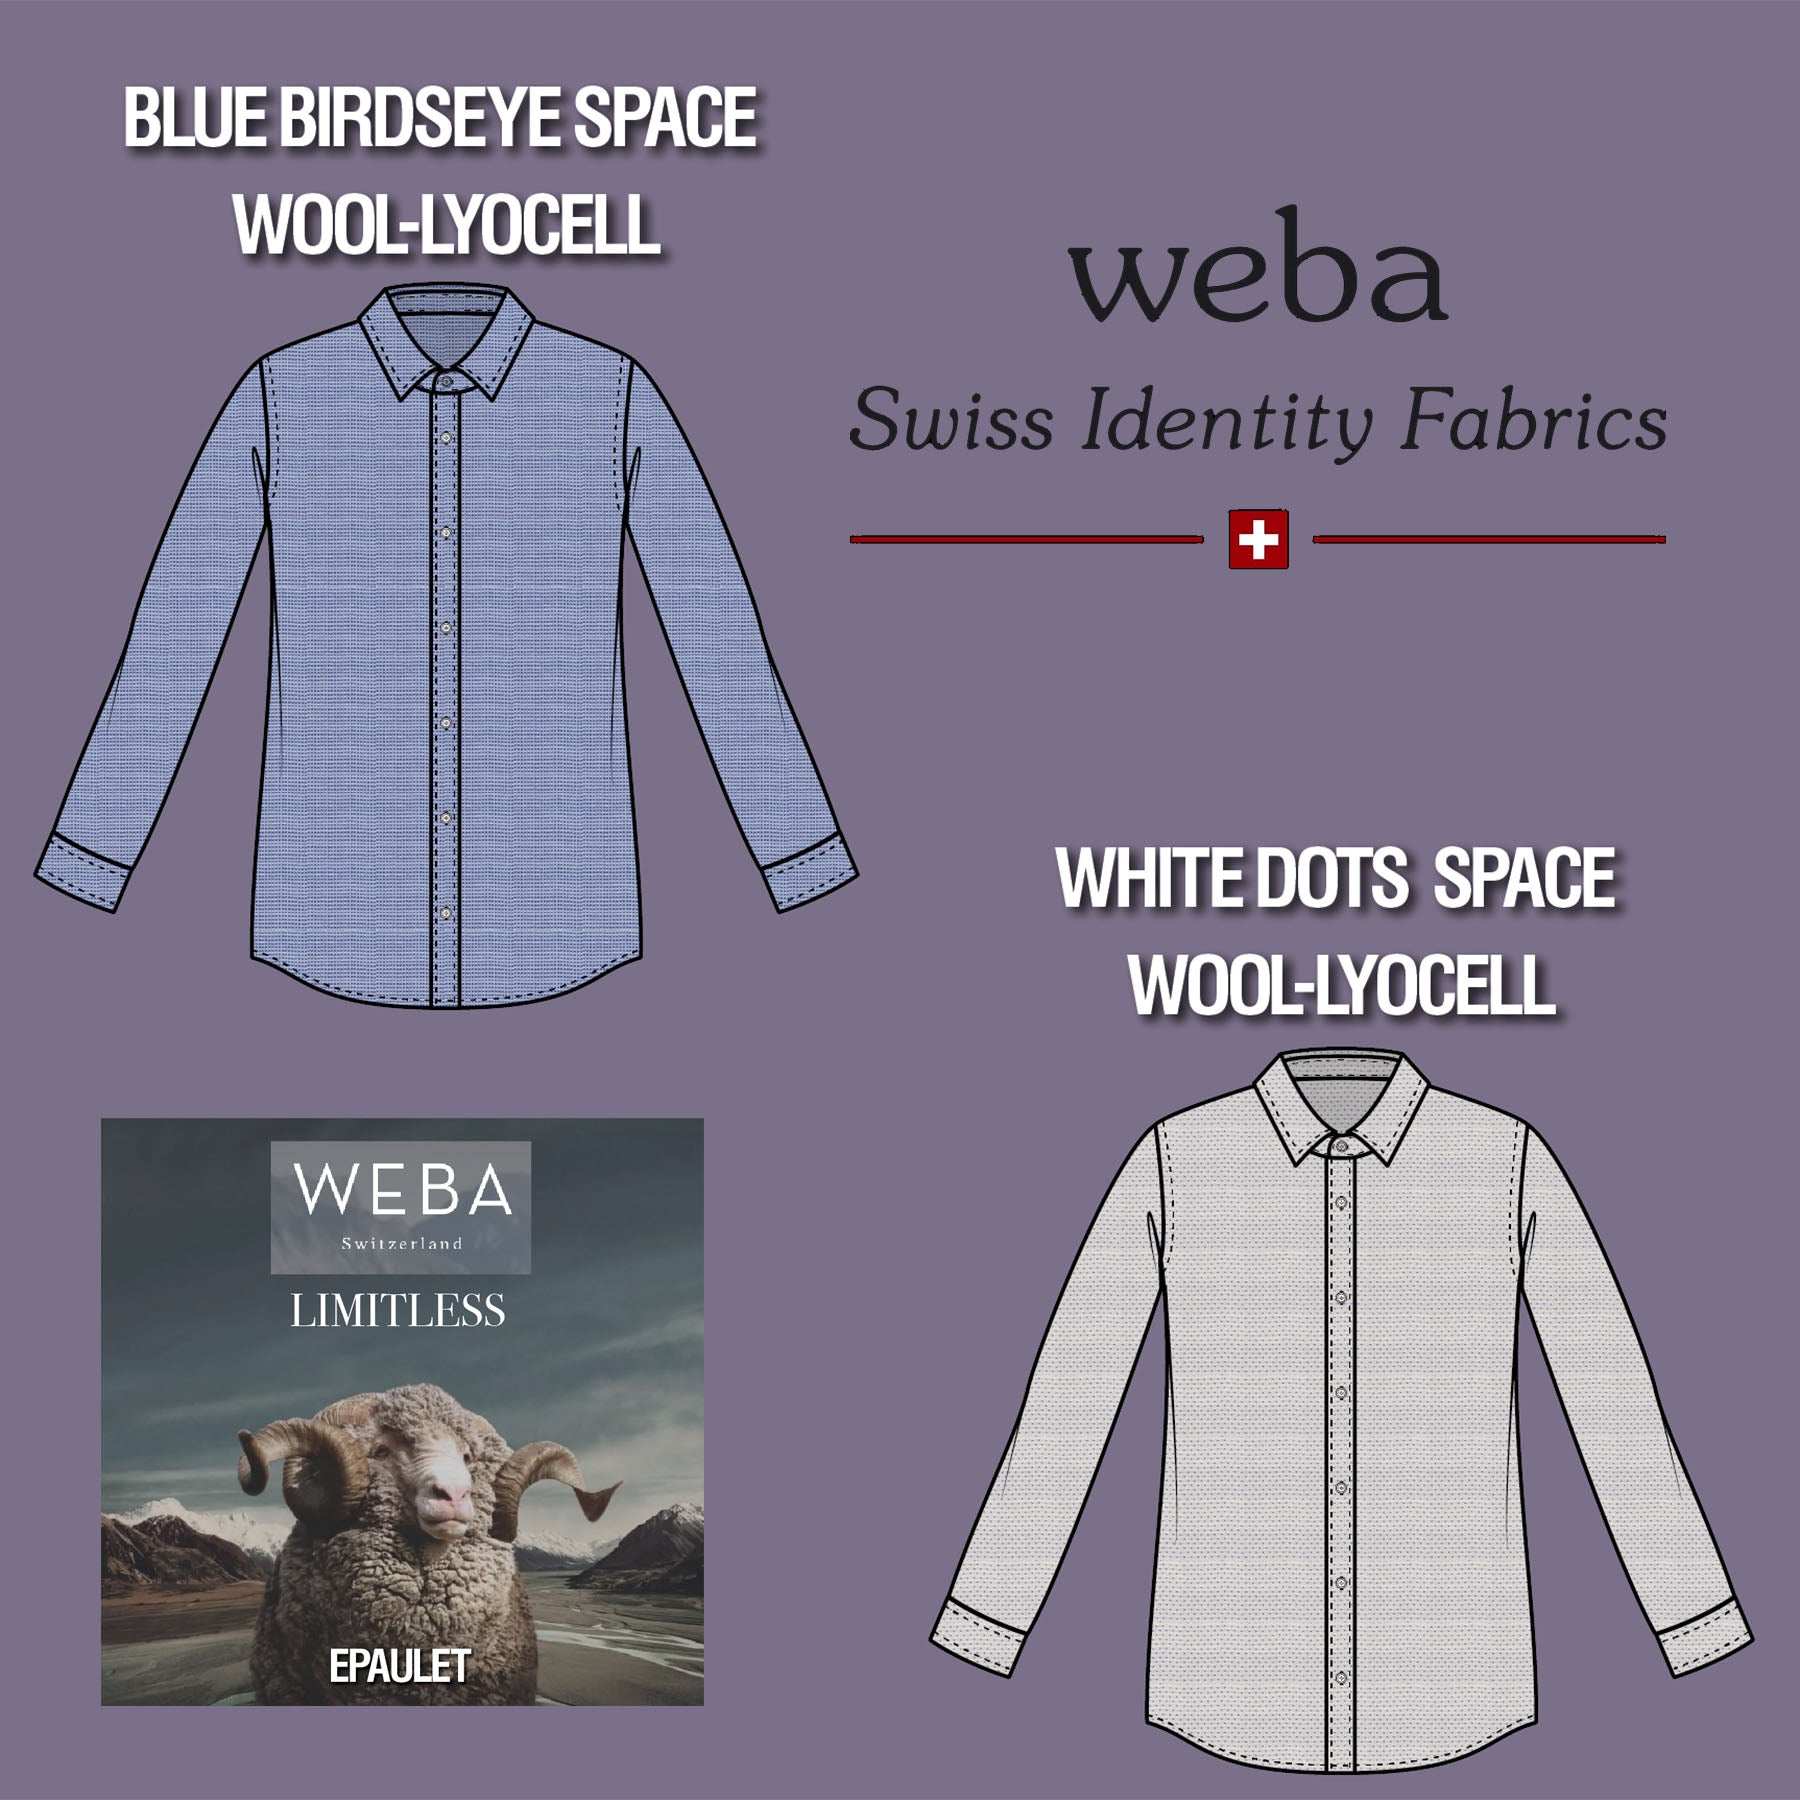 Custom Shirting Washable Wool Blends & Casual Patterns